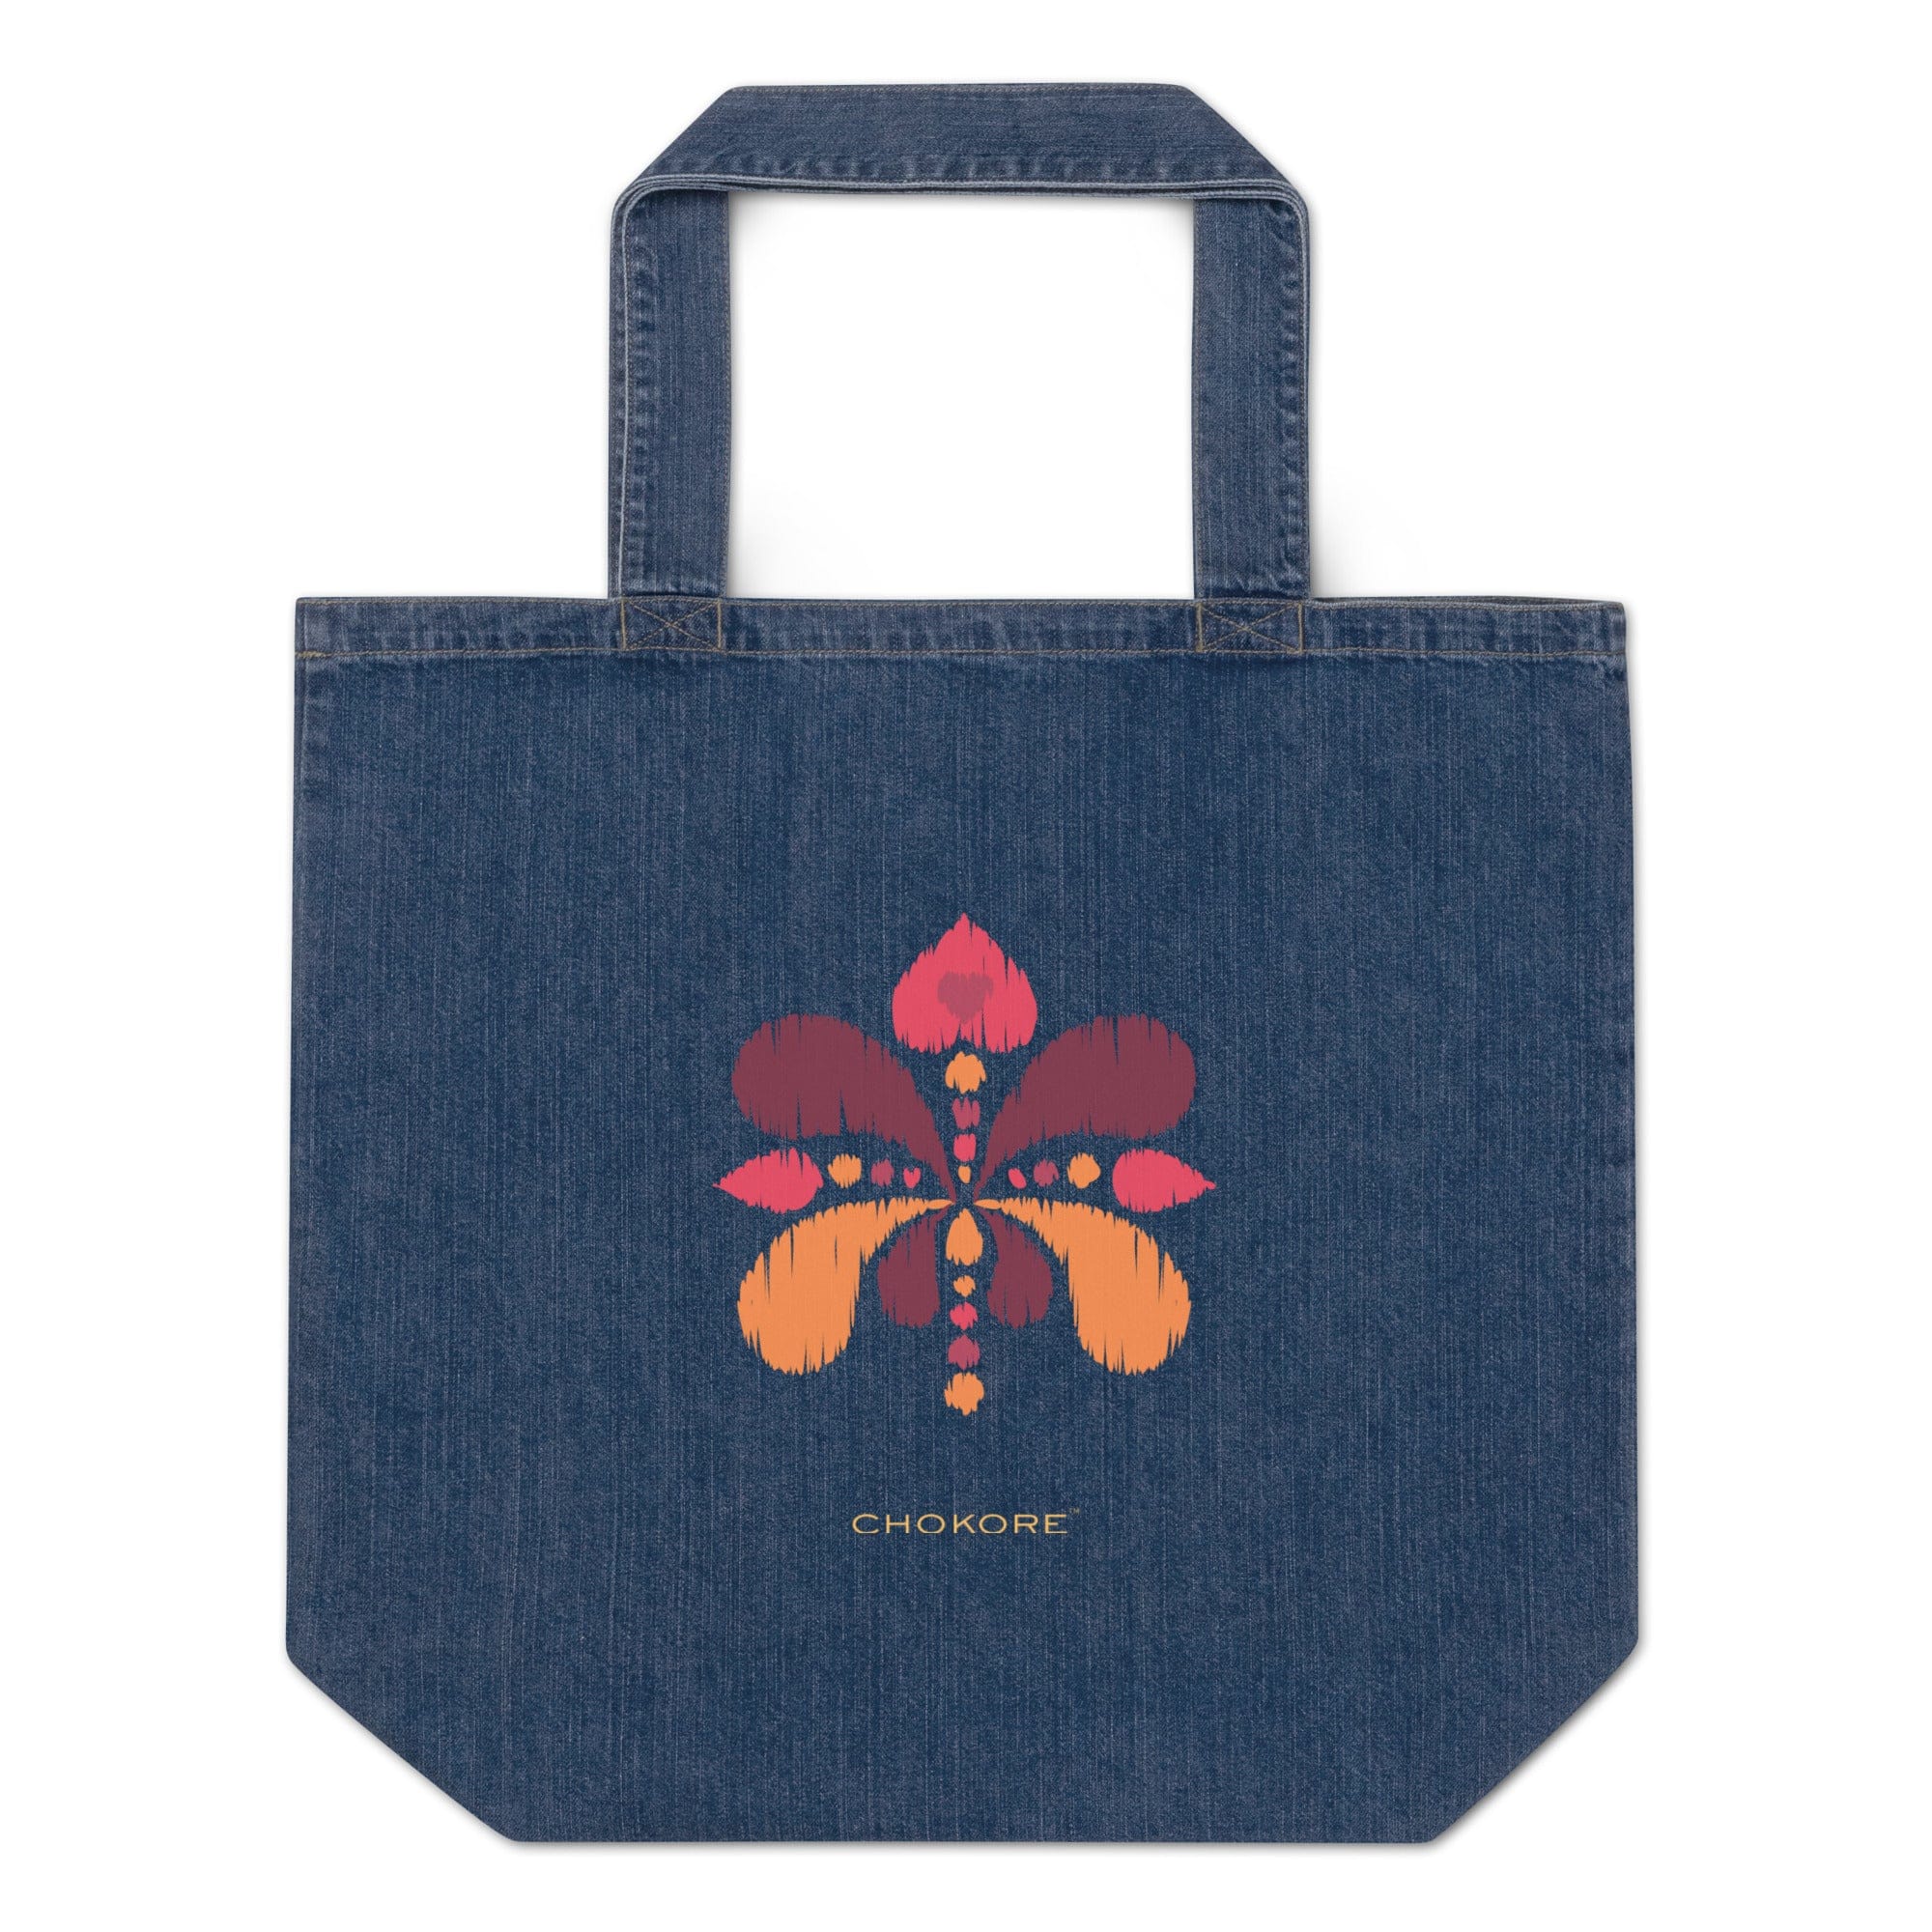 Organic Denim Tote Bag with a Red & Burgundy print. From the Indian at Heart collection.